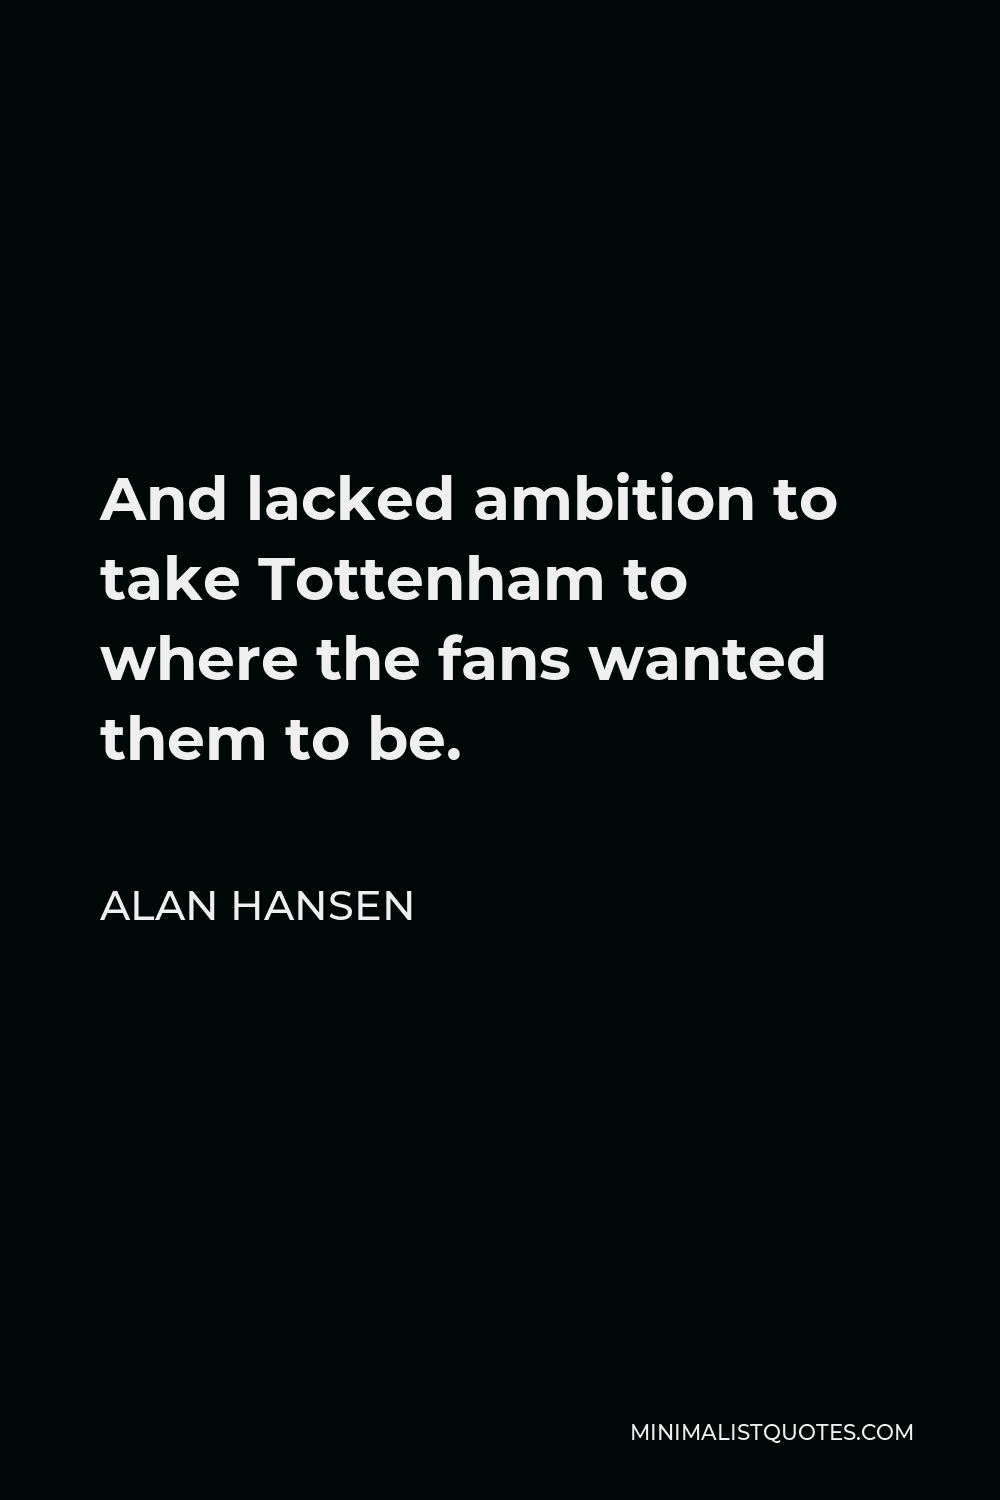 Alan Hansen Quote - And lacked ambition to take Tottenham to where the fans wanted them to be.